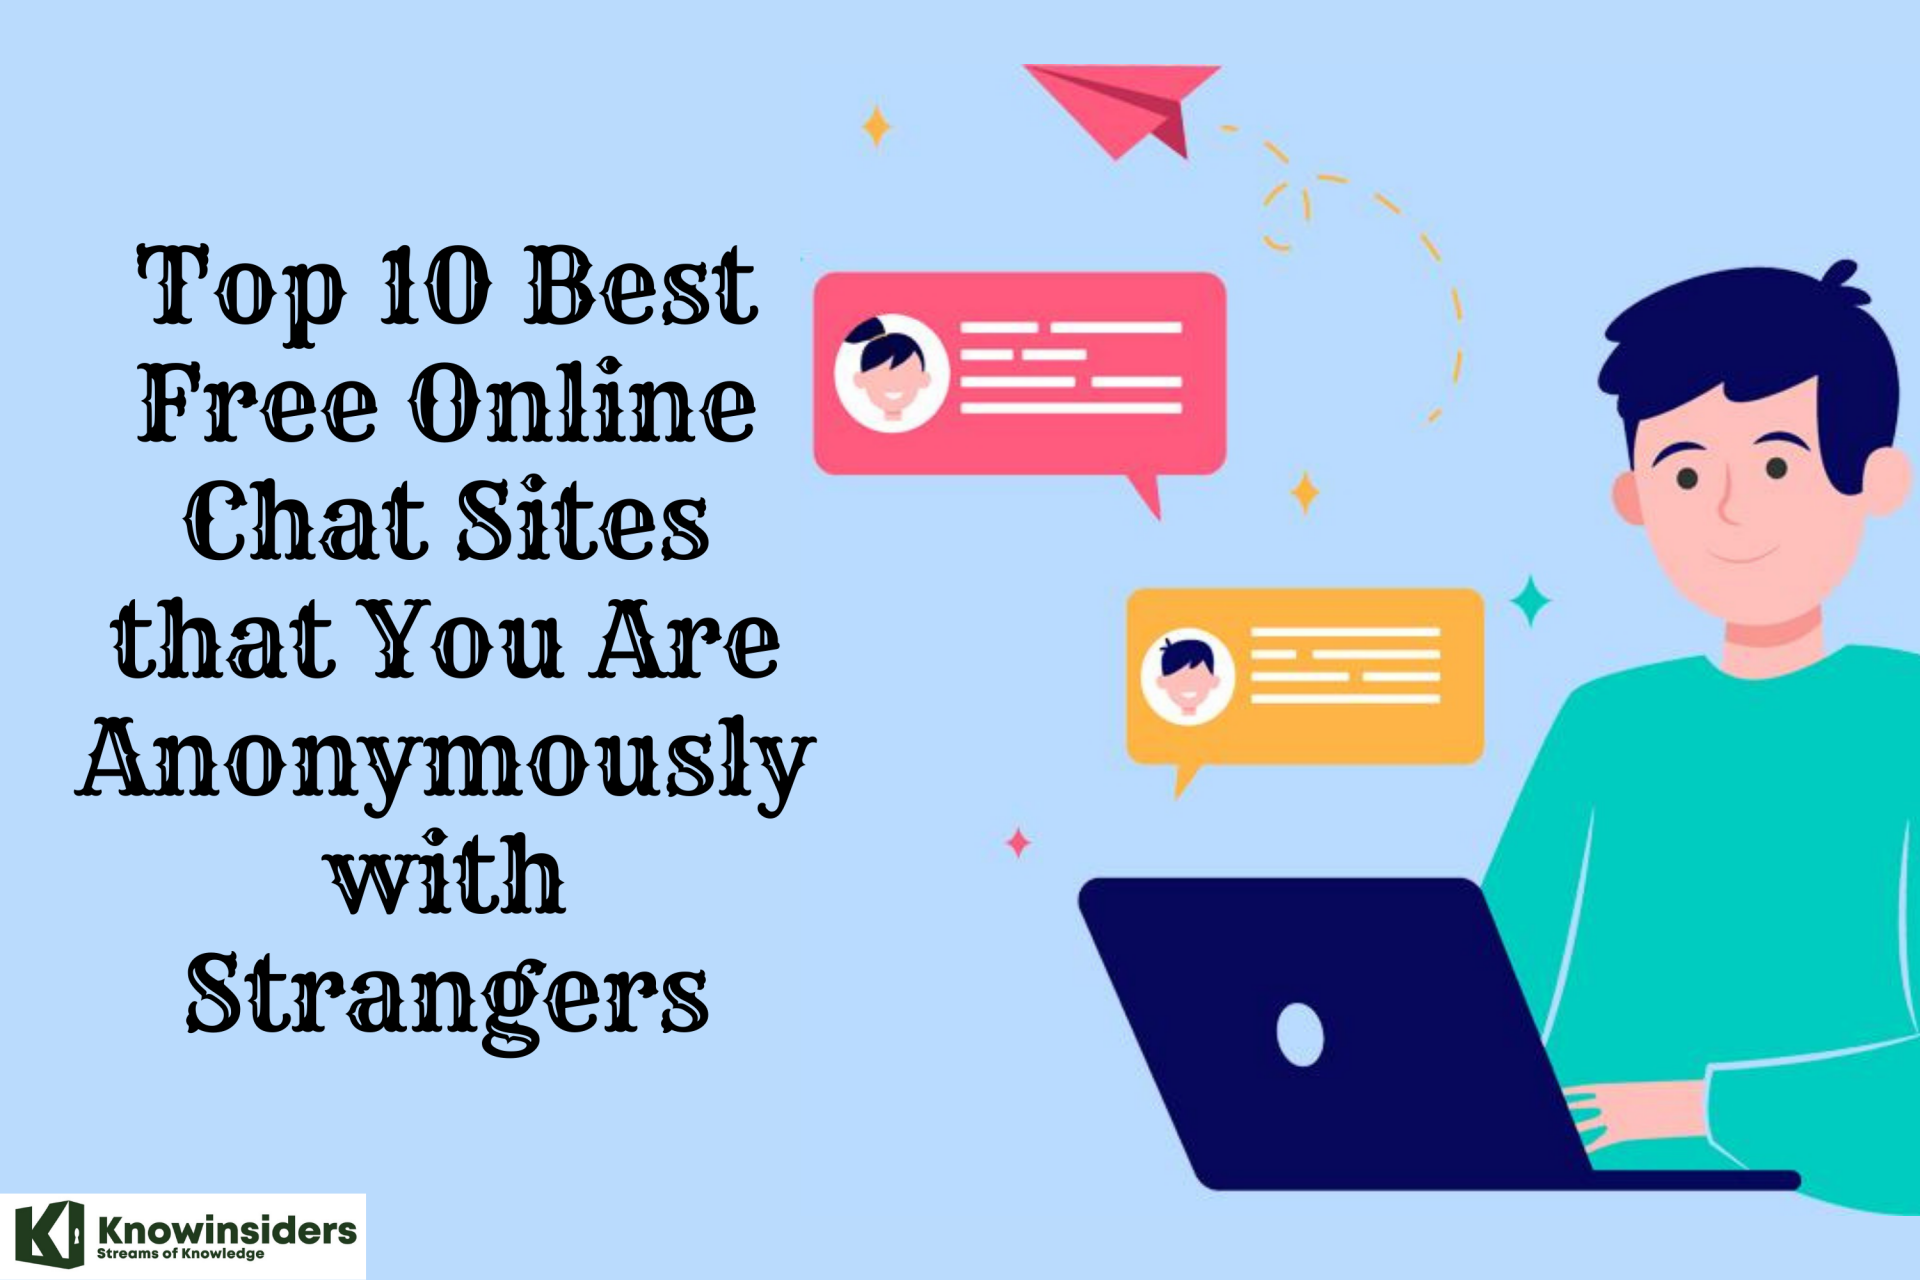 10 Best Free Online Chat Sites that You Are Anonymously with Strangers